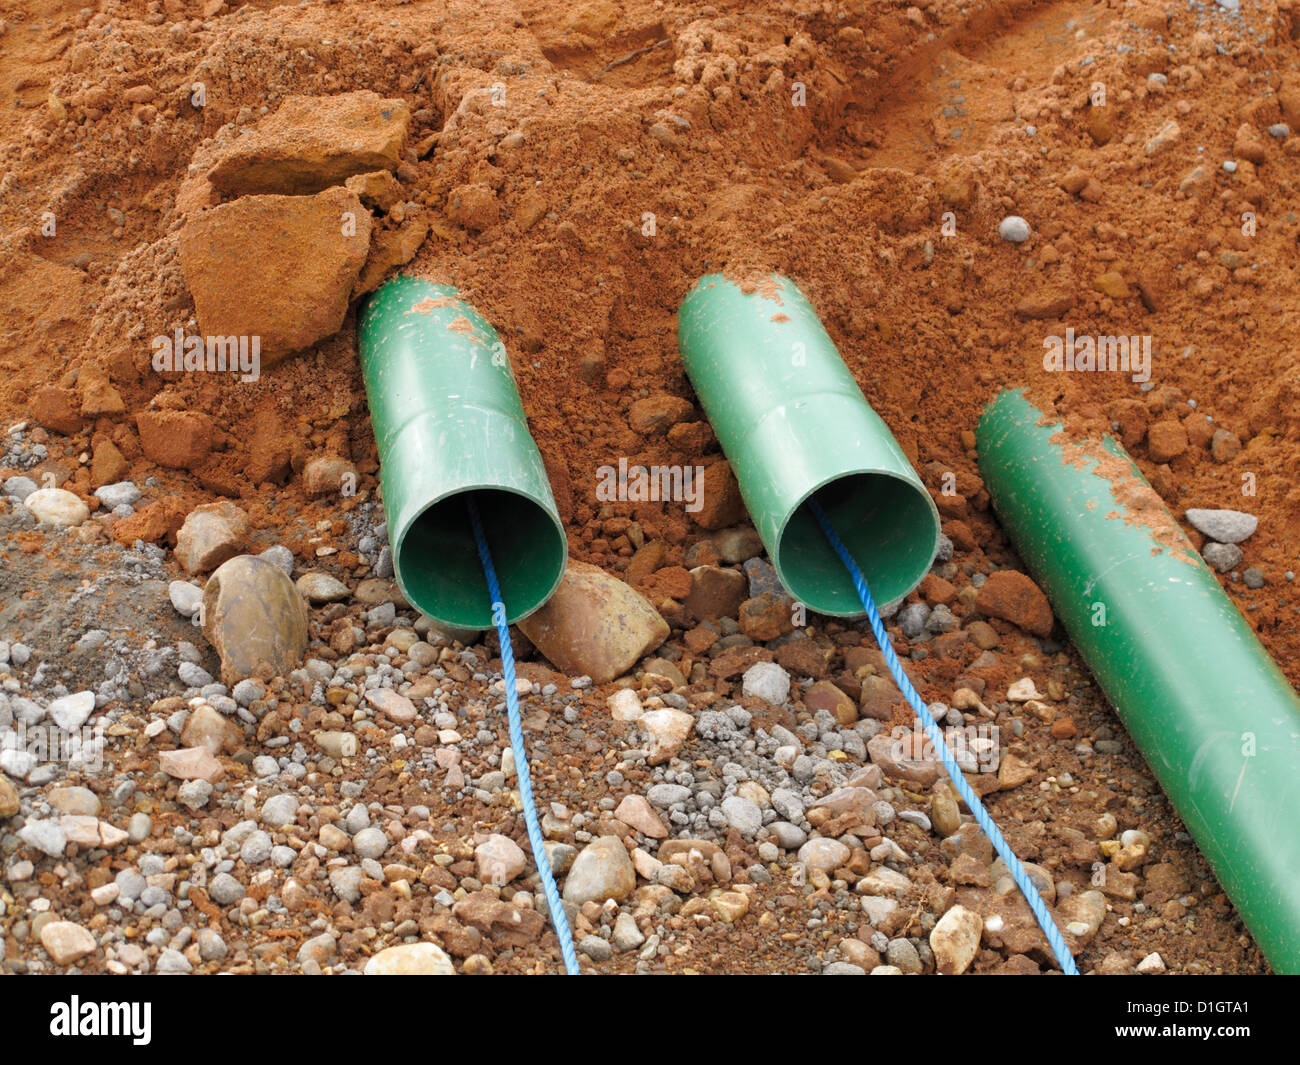 Road construction site UK trench with green ducts for cable TV and internet fibre-optic fiber optic communication cables Stock Photo